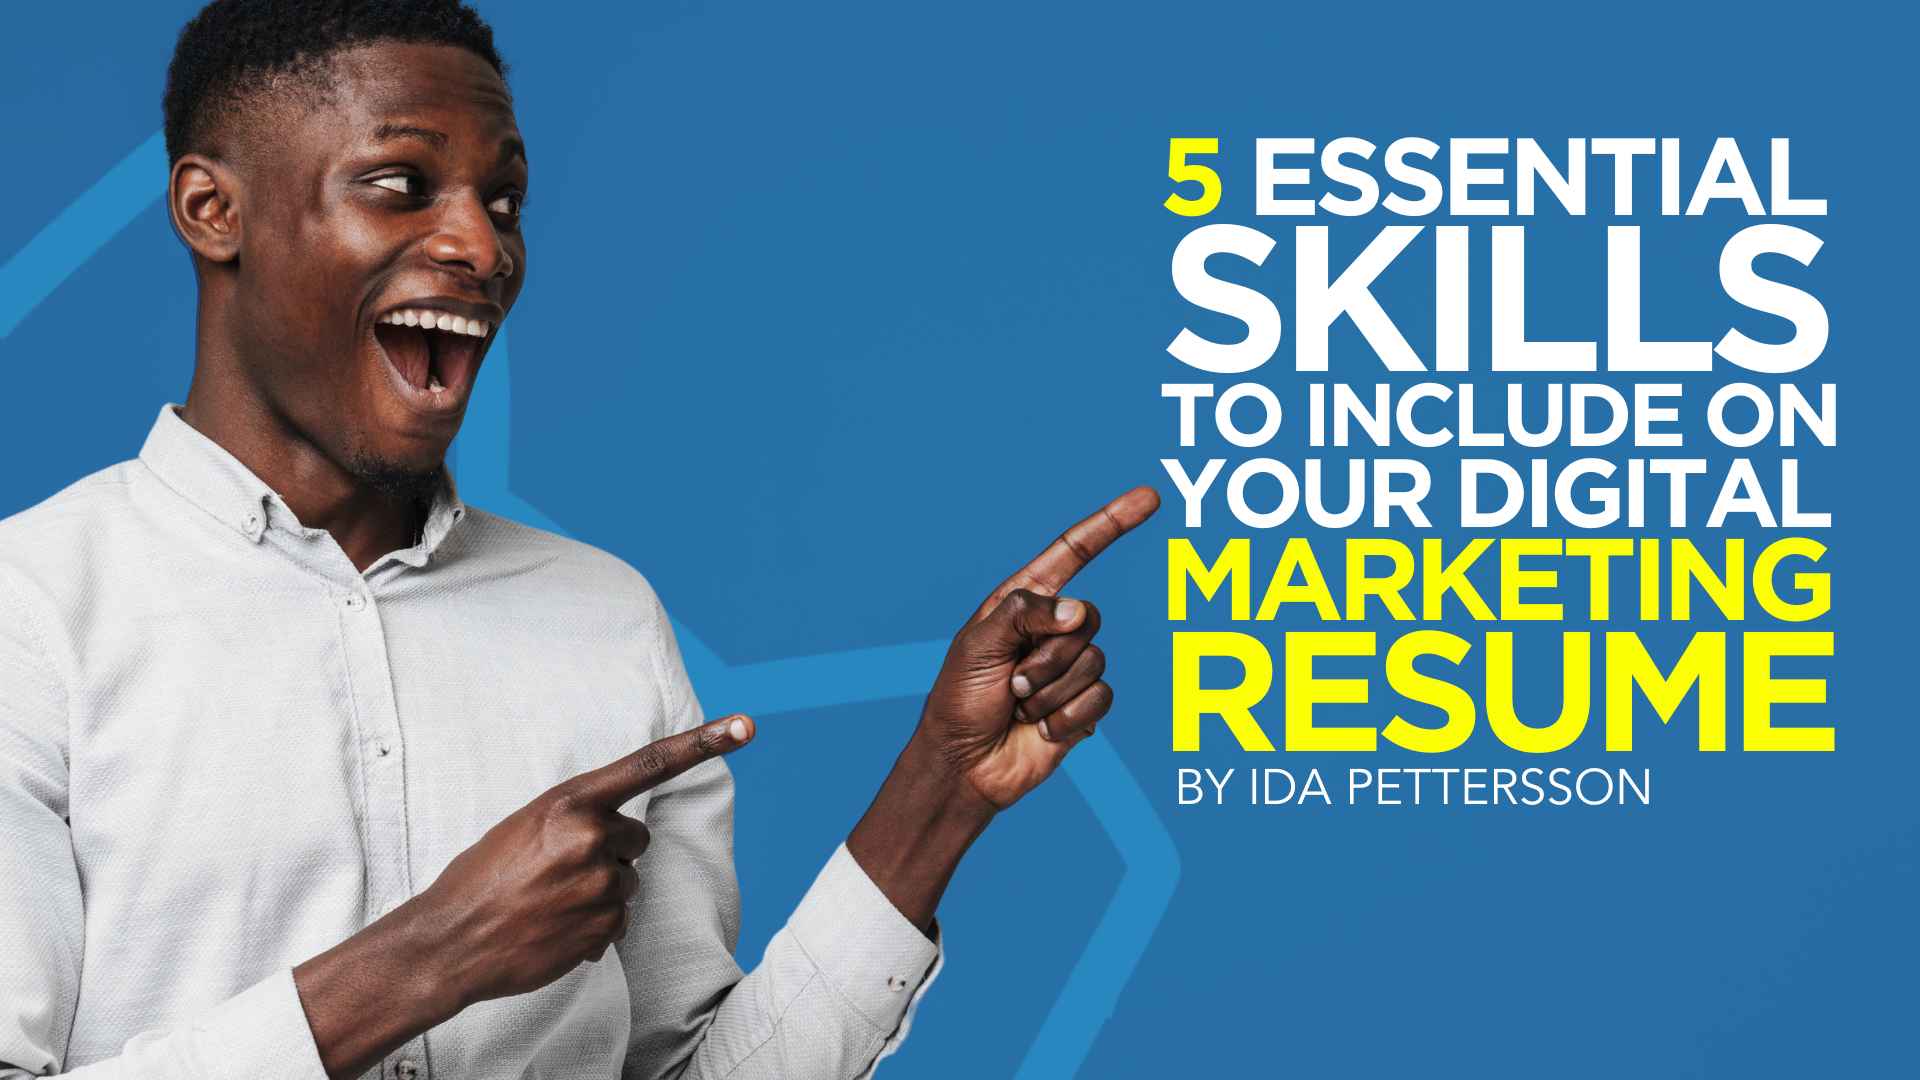 5 Essential Skills to Include on Your Digital Marketing Resume